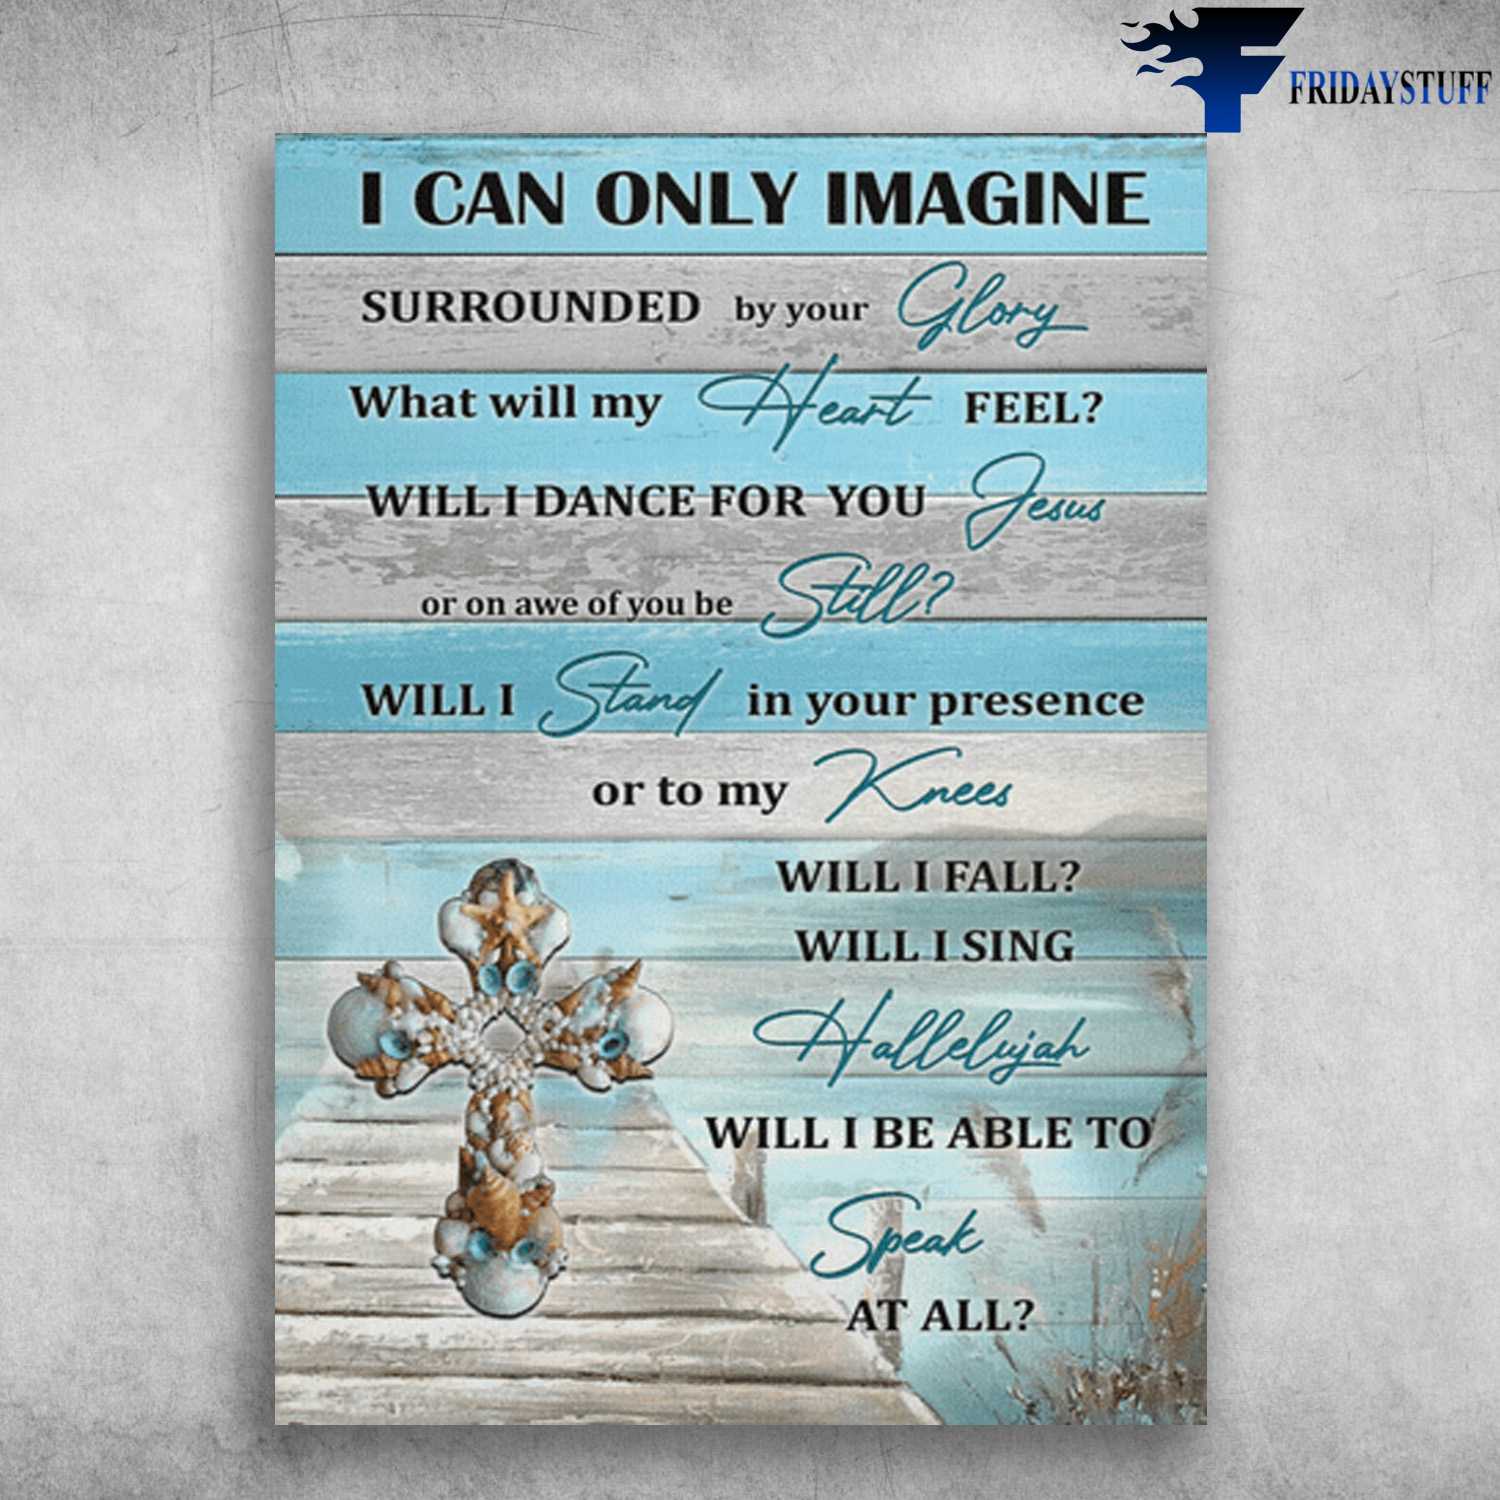 God Cross - I Can Only Imagine, Surrounded By Your Glory, What Will My Heart Feel, Will I Dance For You, Jesus, Or In Awe Of You Be Still, Will I Stand In Your Presence, Or To My Kness Will I Fall